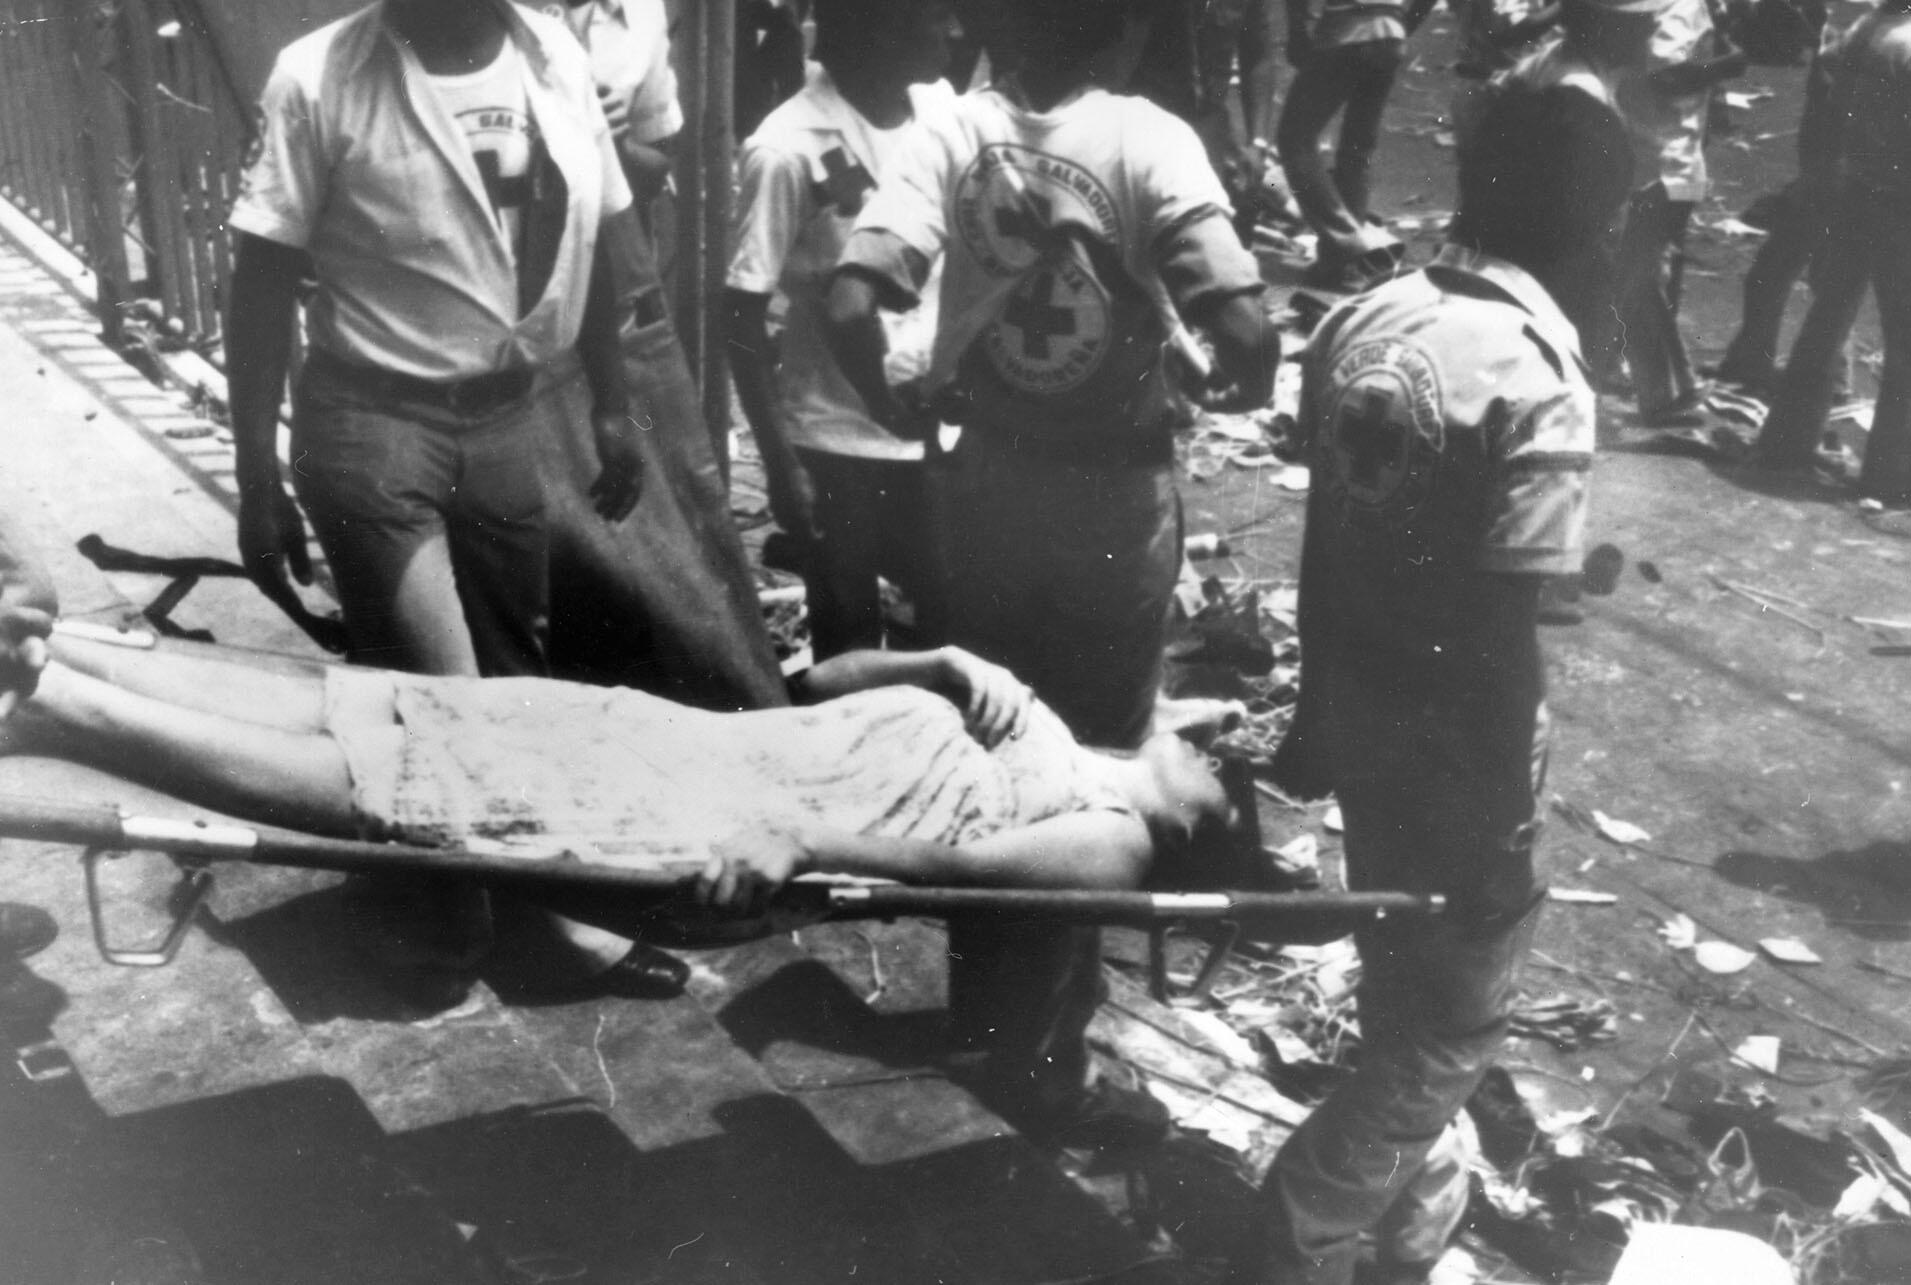  a casualty of the massacre at Archbishop Oscar Romero’s funeral, April 1980. (Photo from Keystone/Getty Images.)